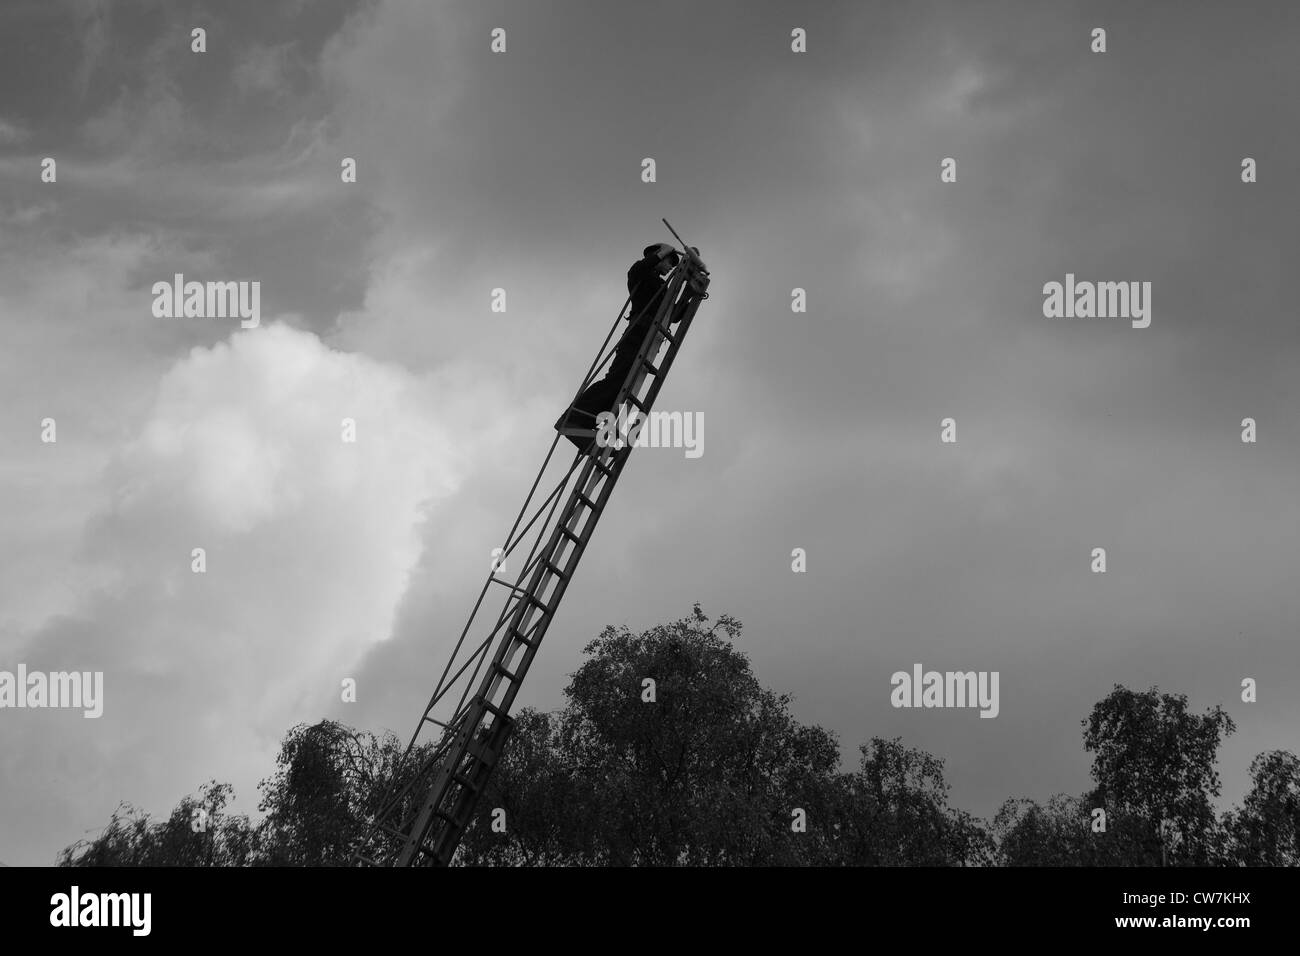 Member of the 1940's National Fire Service on ladder with water jet/hose Stock Photo